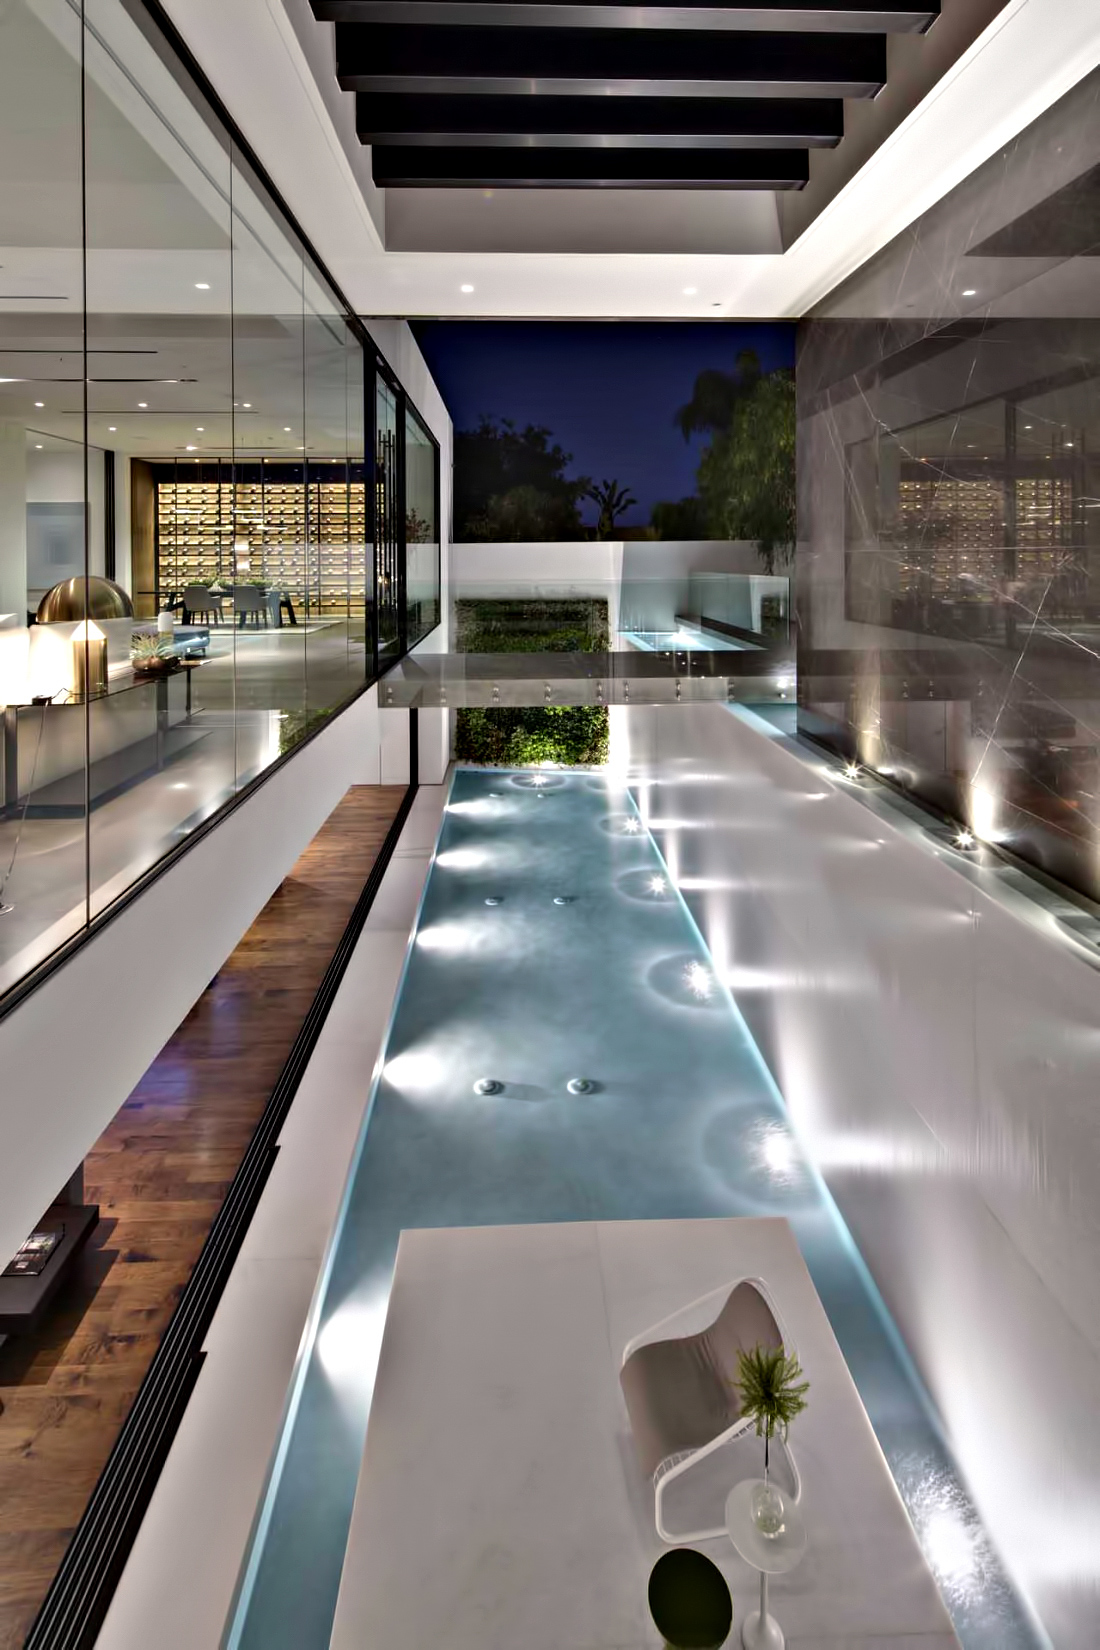 Trophy Modern Luxury Residence - 1442 Tanager Way, Los Angeles, CA, USA